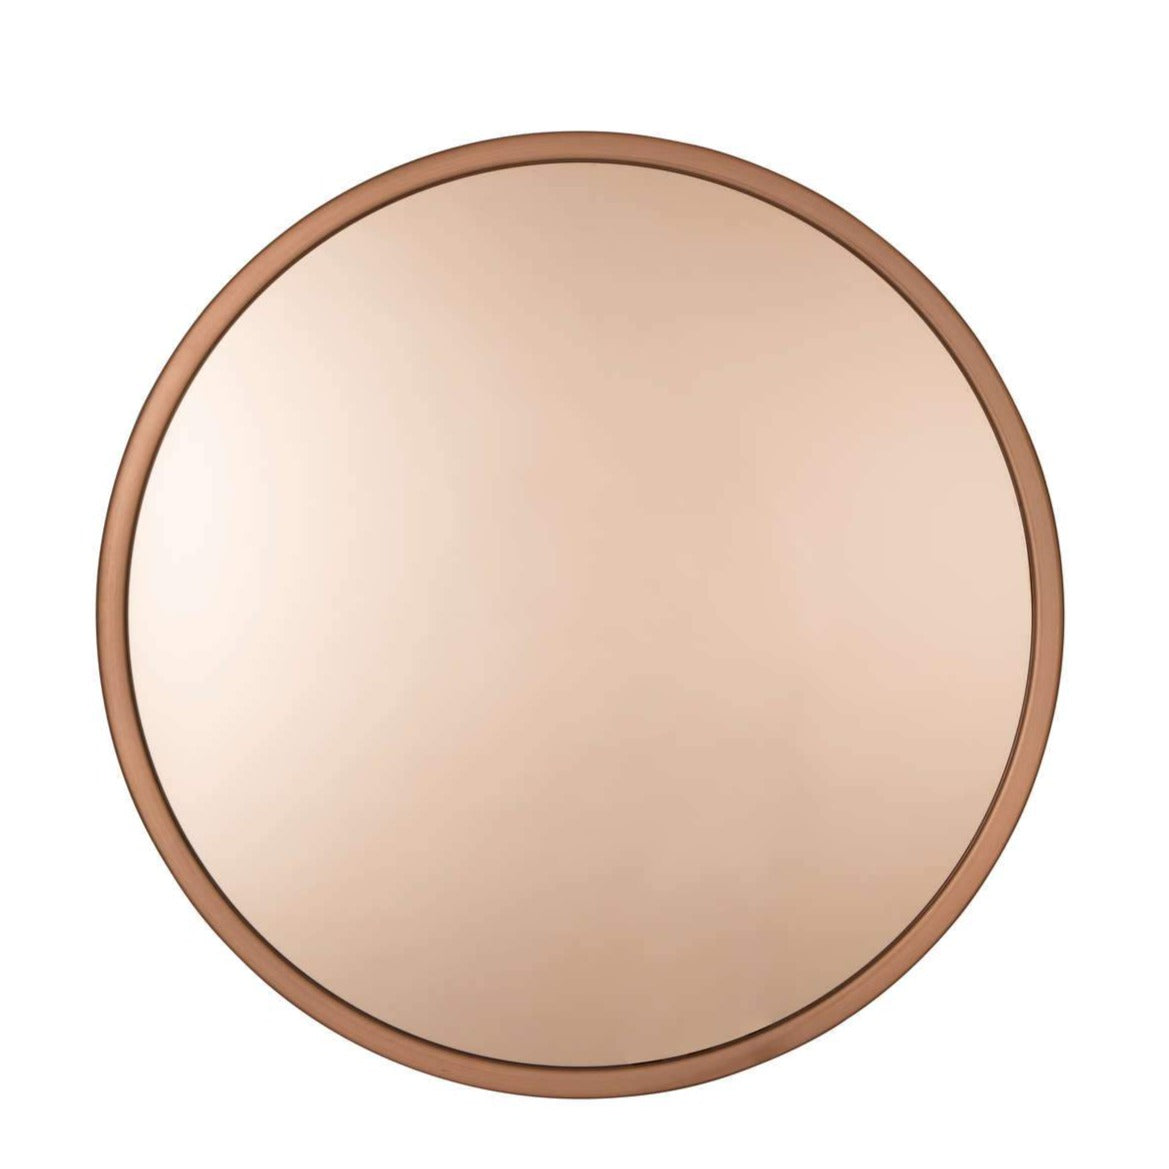 The Bandit mirror stands out from others. The simplicity of the materials used, glass with a metal frame painted color, make the whole house need this extremely elegant addition. The subtlety used in production means that every modern interior of the hall asks you to hang it on the wall. Any small and classic house room can gain some space visually and become even more cozy, thanks to it.